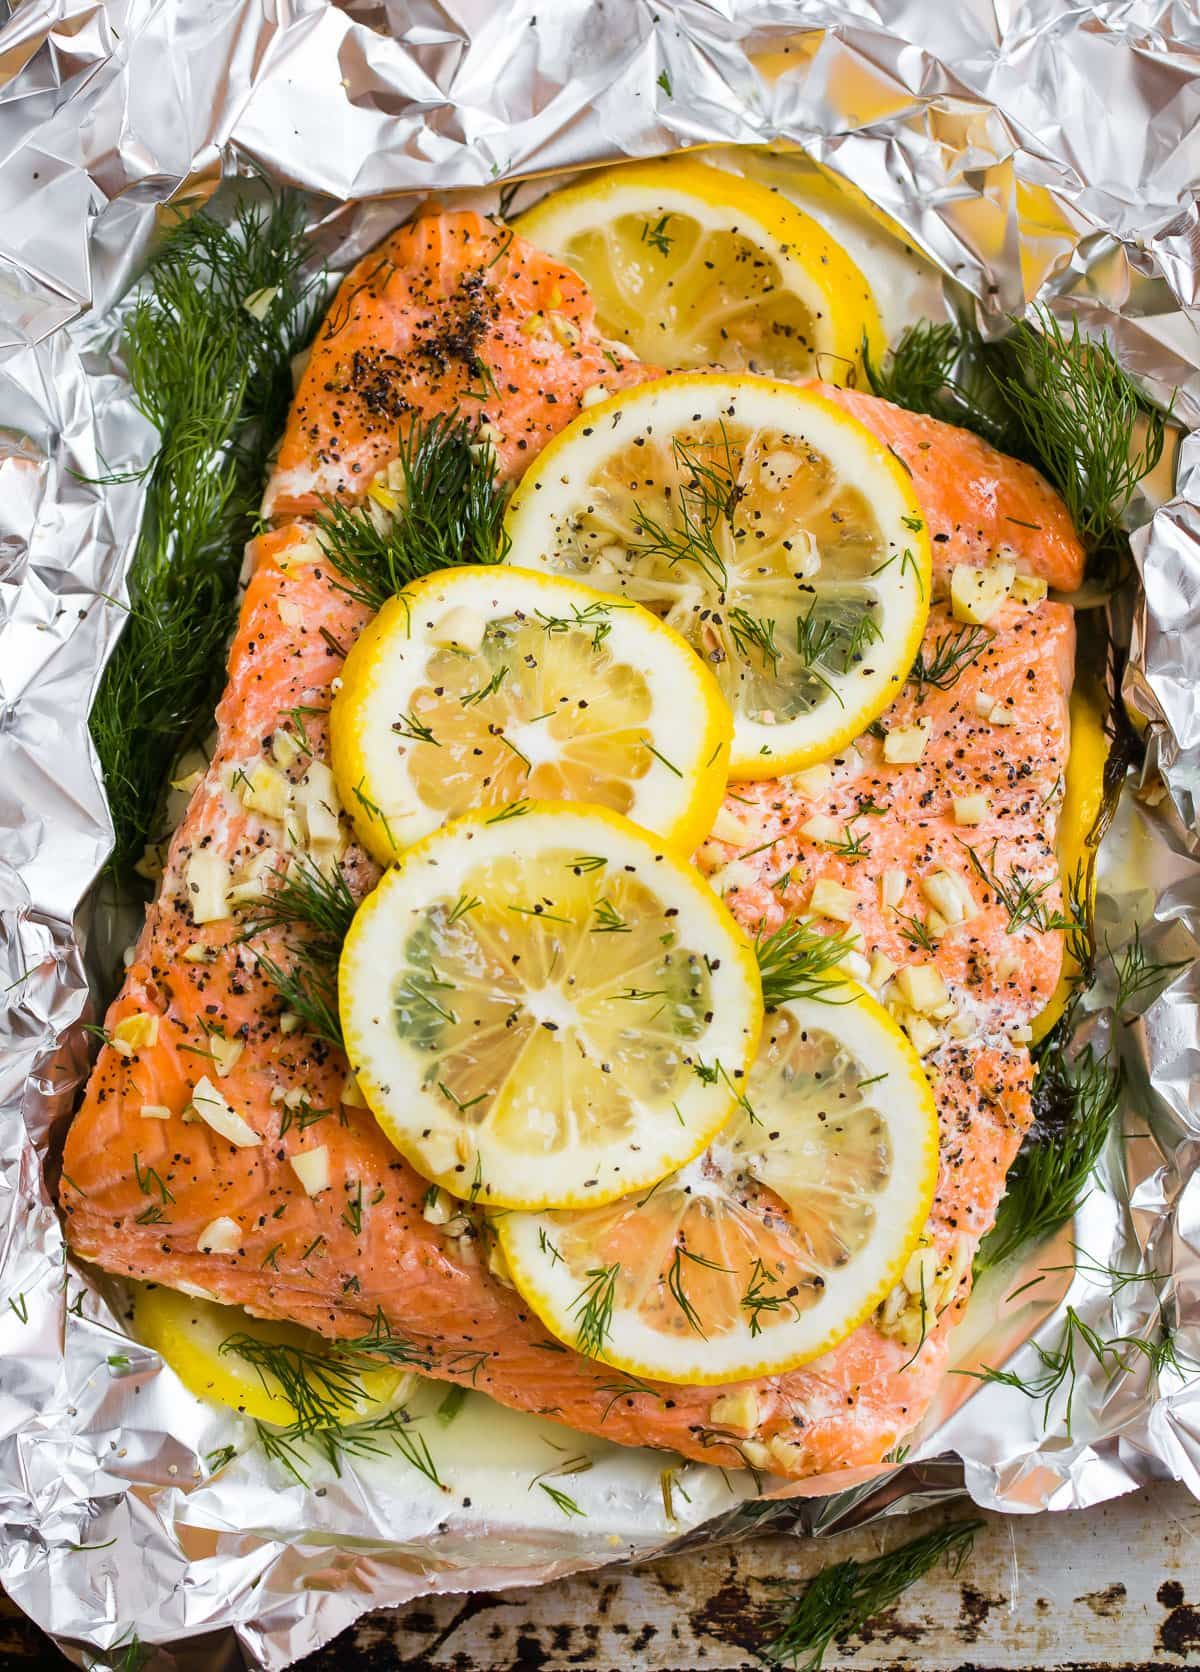 How Long To Cook Salmon On Grill